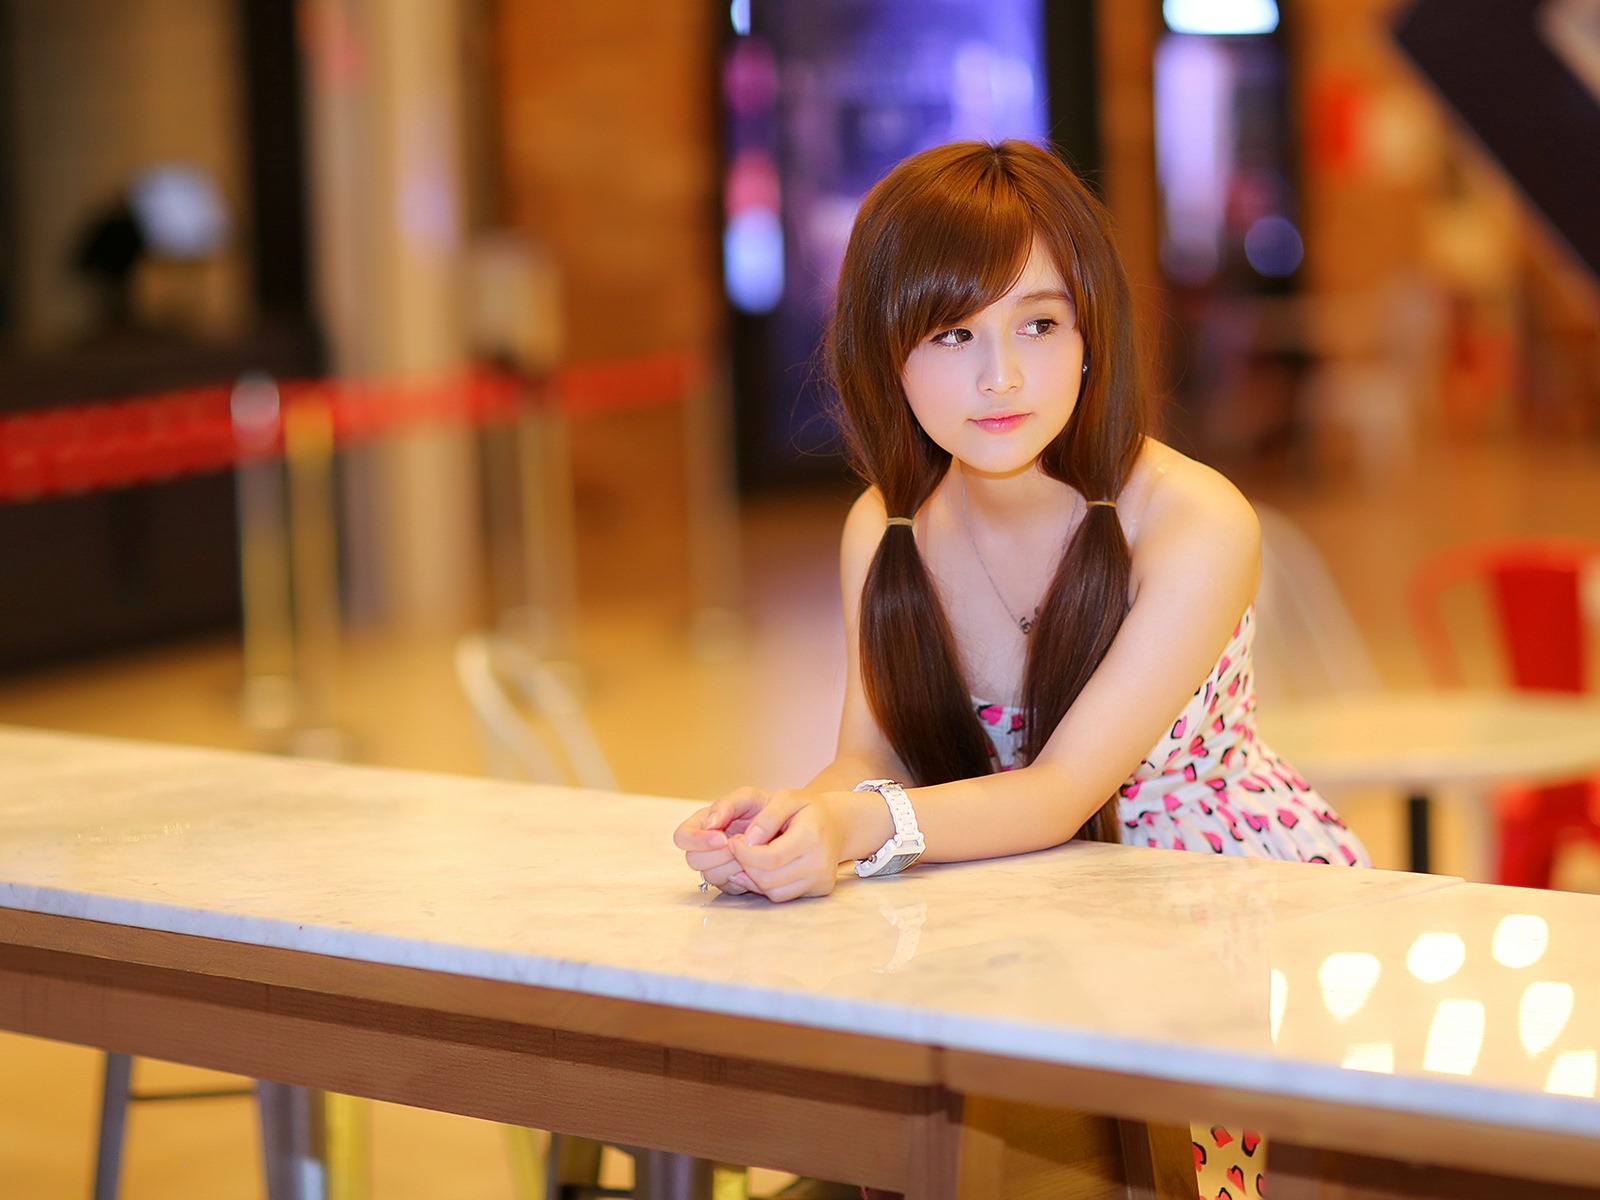 Pure and lovely young Asian girl HD wallpapers collection (2) #38 - 1600x1200